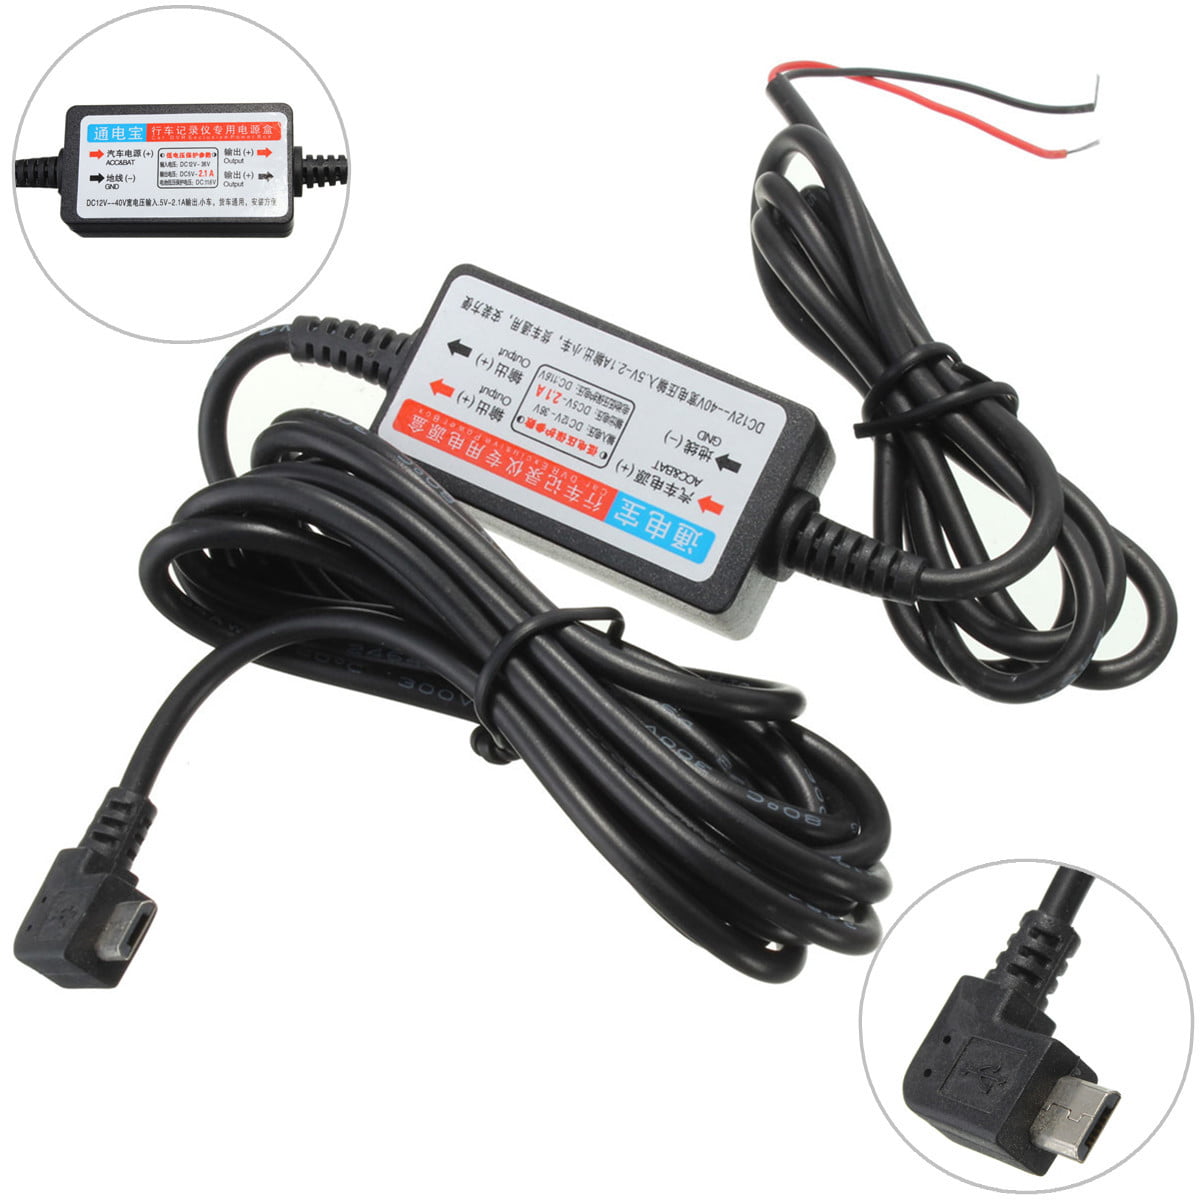 Hard Wire Power Adapter 12v to 5v Cable Mini USB For Car GPS DVR Dash Camera 